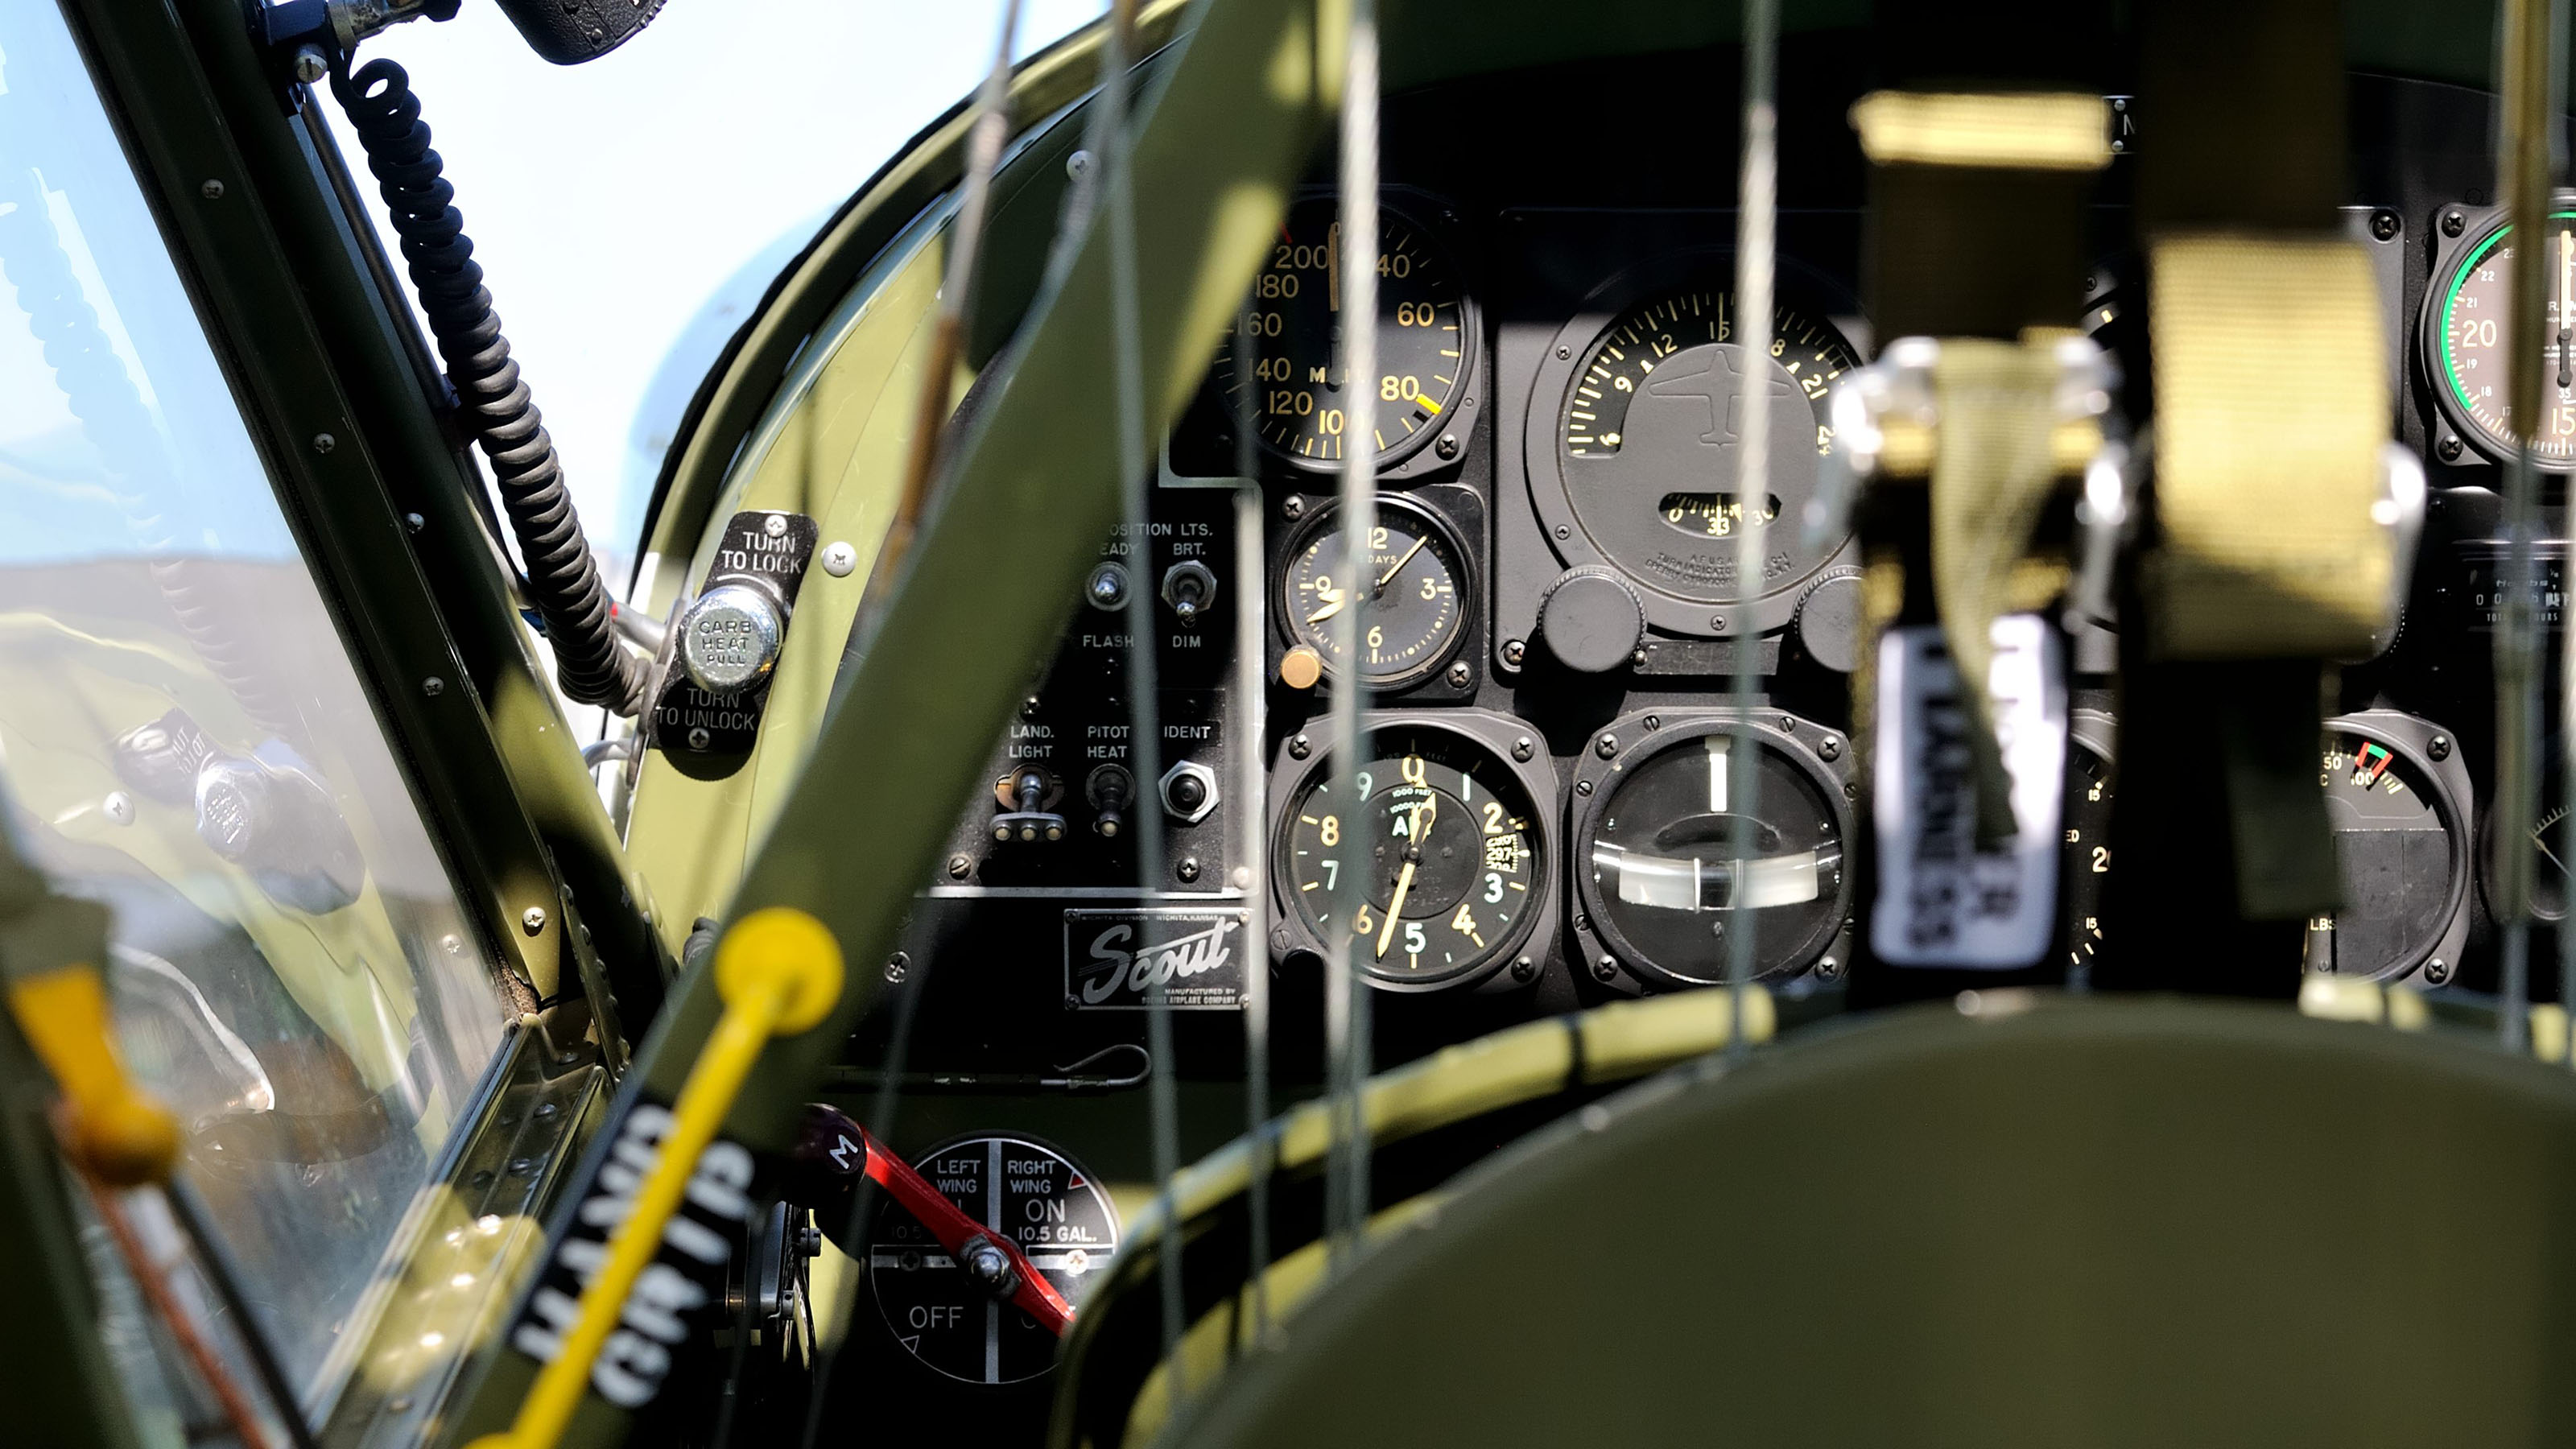 Exposed control cables run between the pilot's and observer's seats in Keith and Kathy Brunquists' Boeing YL-15 Scout prototype. The observer's seat can face aft or forward; dual controls allow the observer to fly when facing forward.